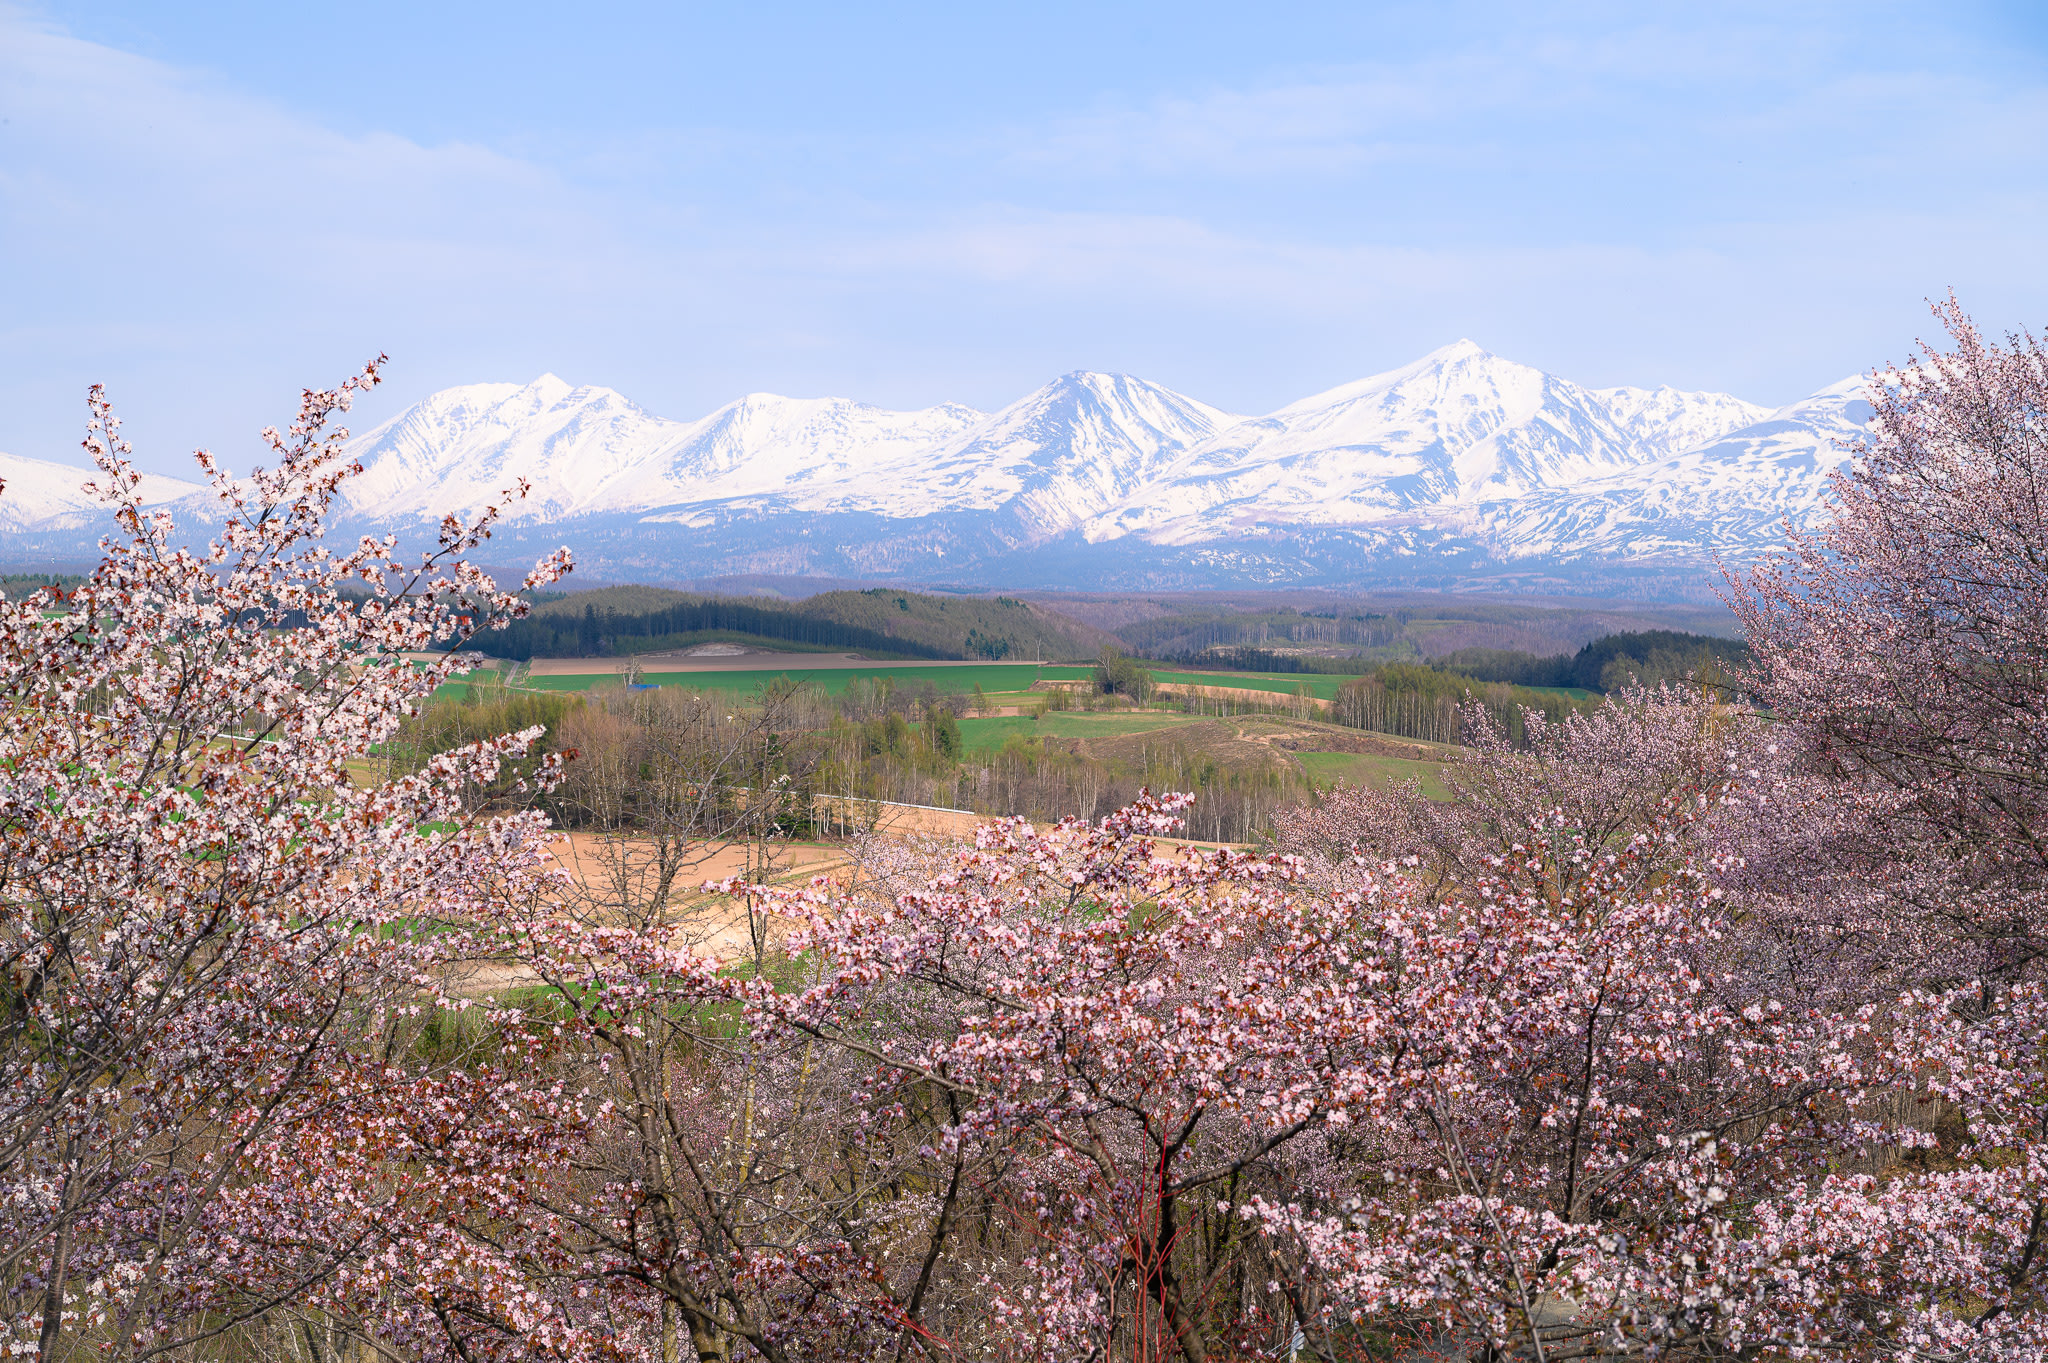 Cherry blossoms frame a landscape with mountains in the distance.